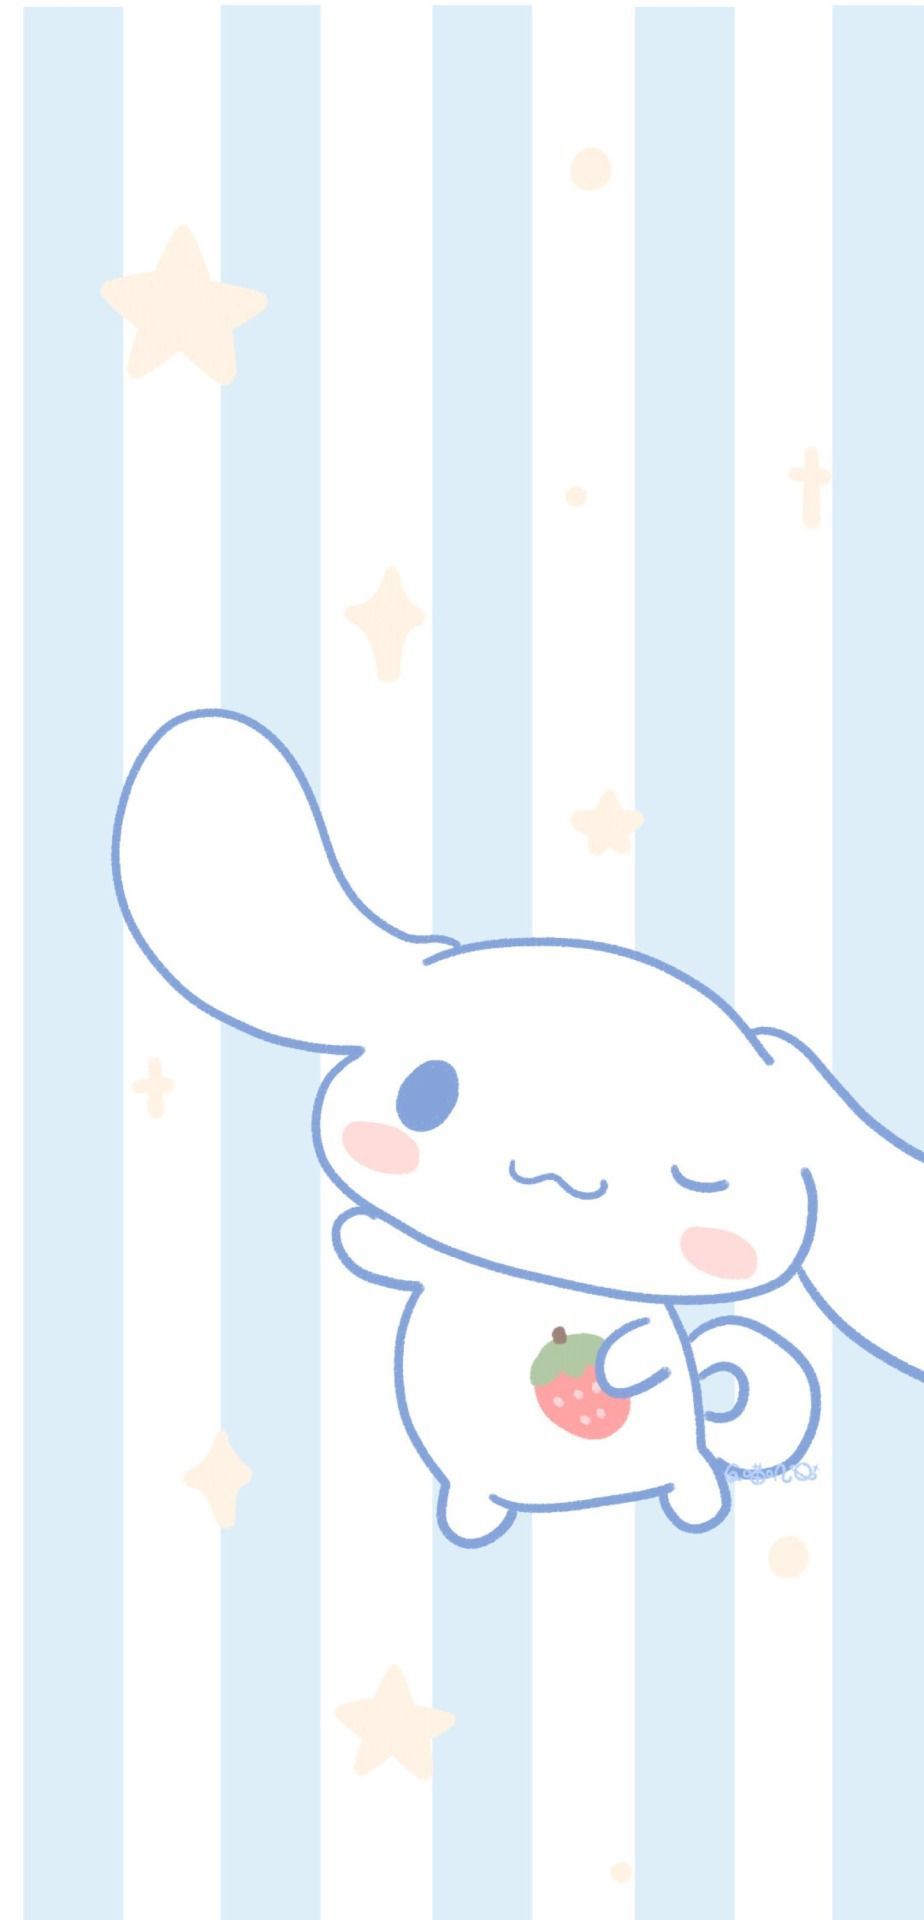 IPhone wallpaper of a cute rabbit holding a strawberry - Cinnamoroll